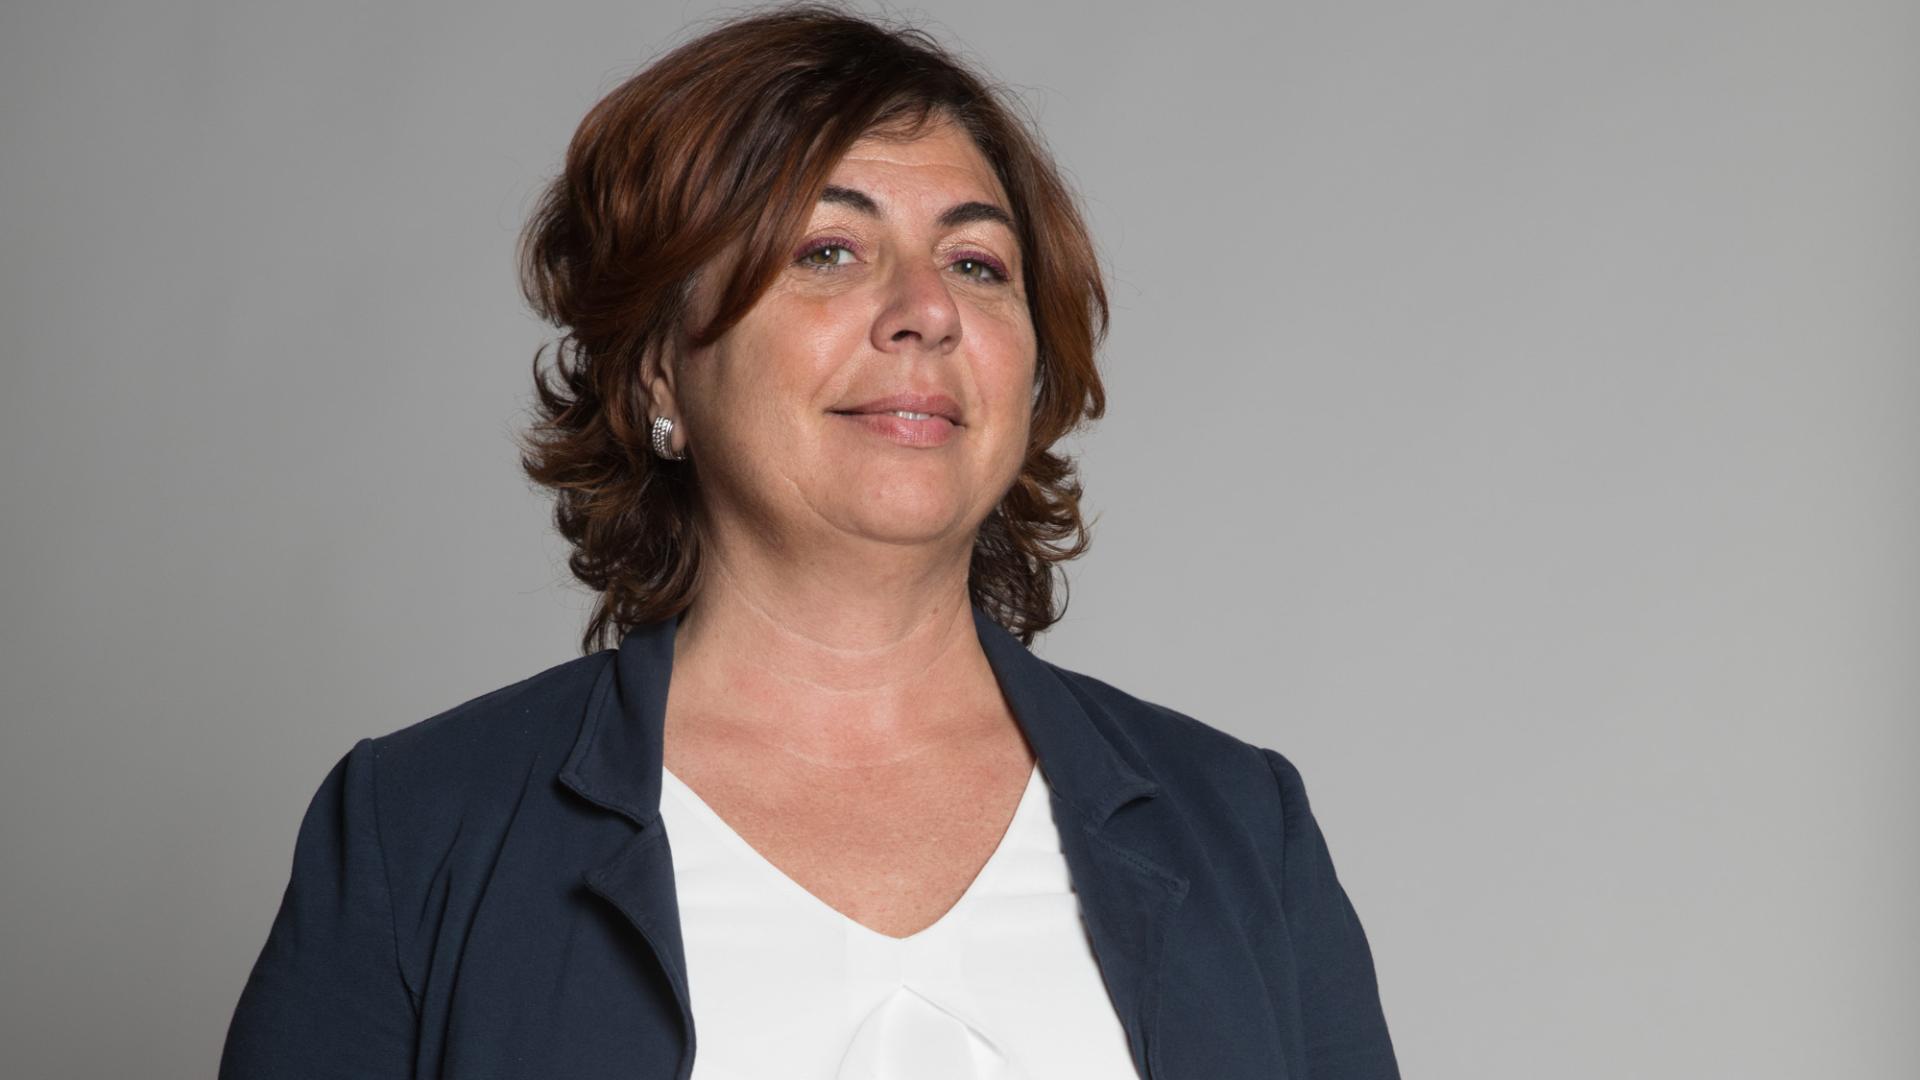 Isabella Picco, Head of Image and Communication Department Gruppo Fipa